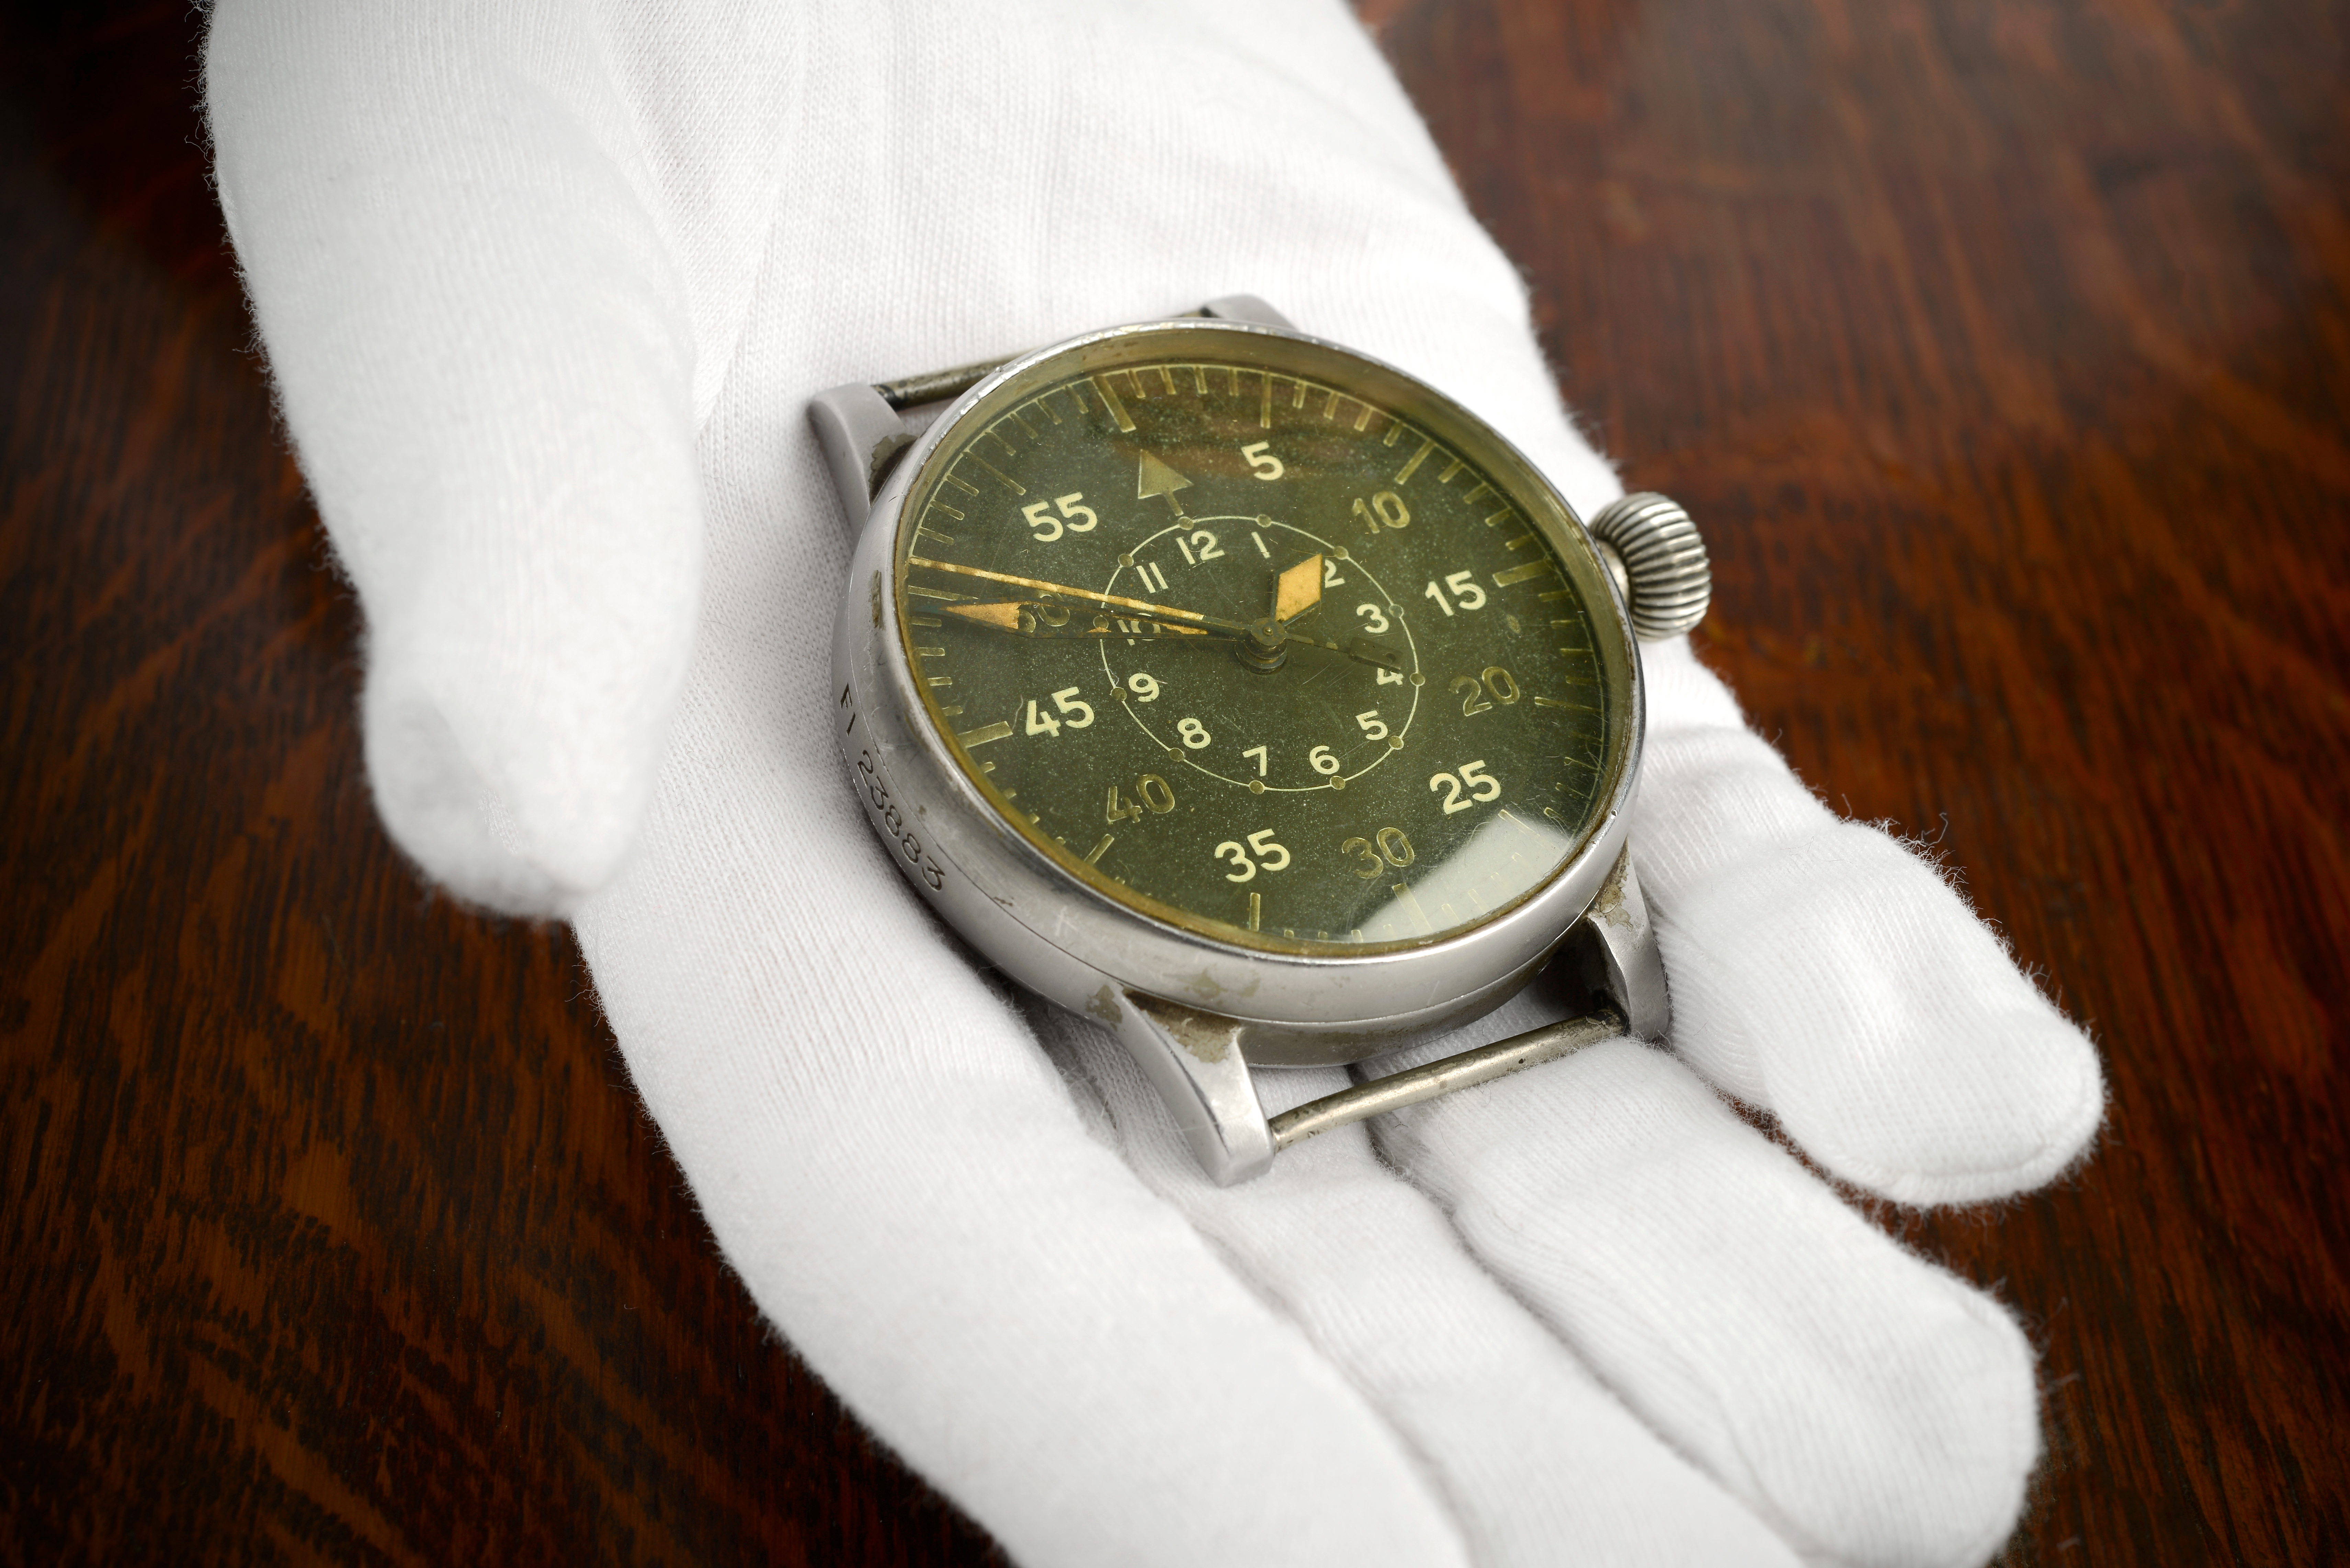 Circa-1942 A. Lange & Sohne German military issue pilot watch head, est. £7,000-£10,000. Image courtesy of Fellows